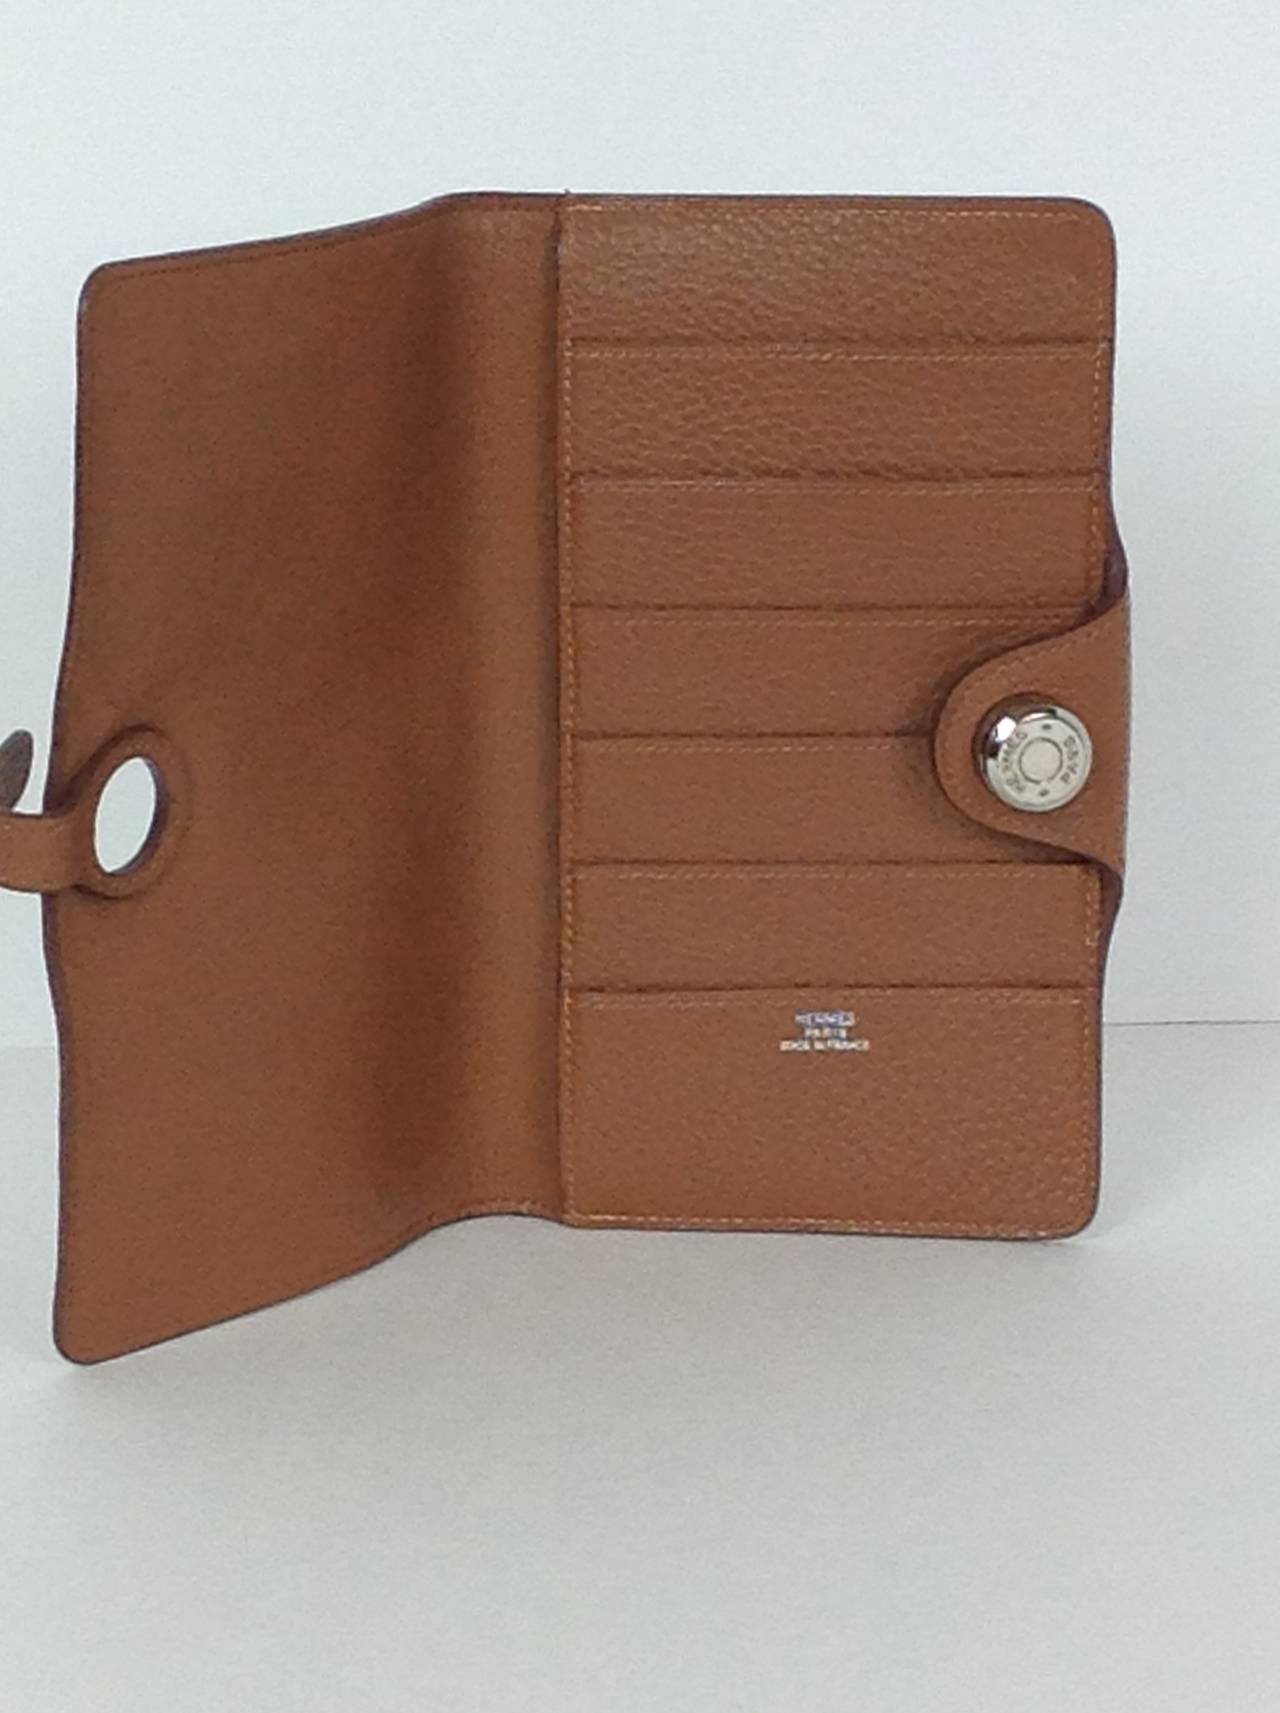 Hermes Dogon wallet in tan togo leather.  
Lined in tan lambskin.  6 slip pockets (for credit cards, ID etc), and one large pocket for bills. Stamped HERMES Paris Made in France.
Closes with fold over flap. Clou de selle tab strap closure, that